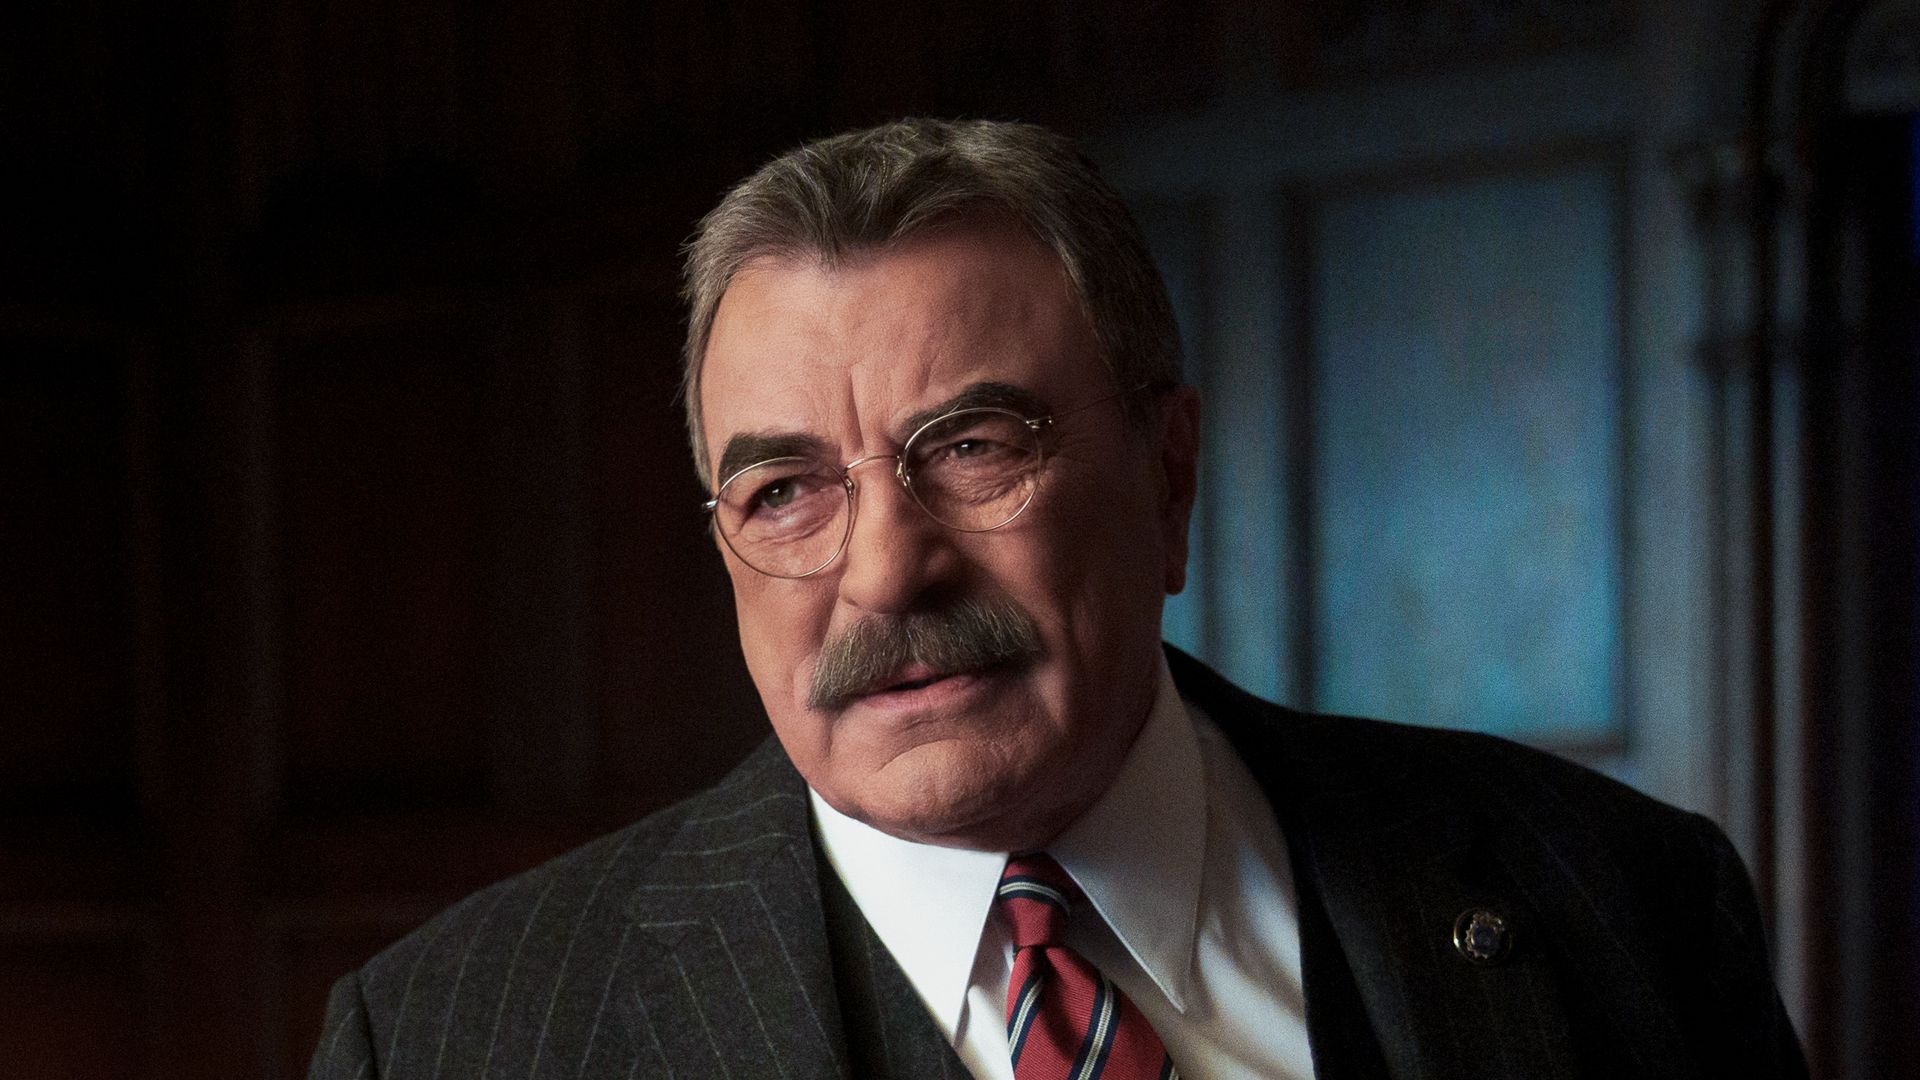 All we know about Blue Bloods star Tom Selleck's life off-screen